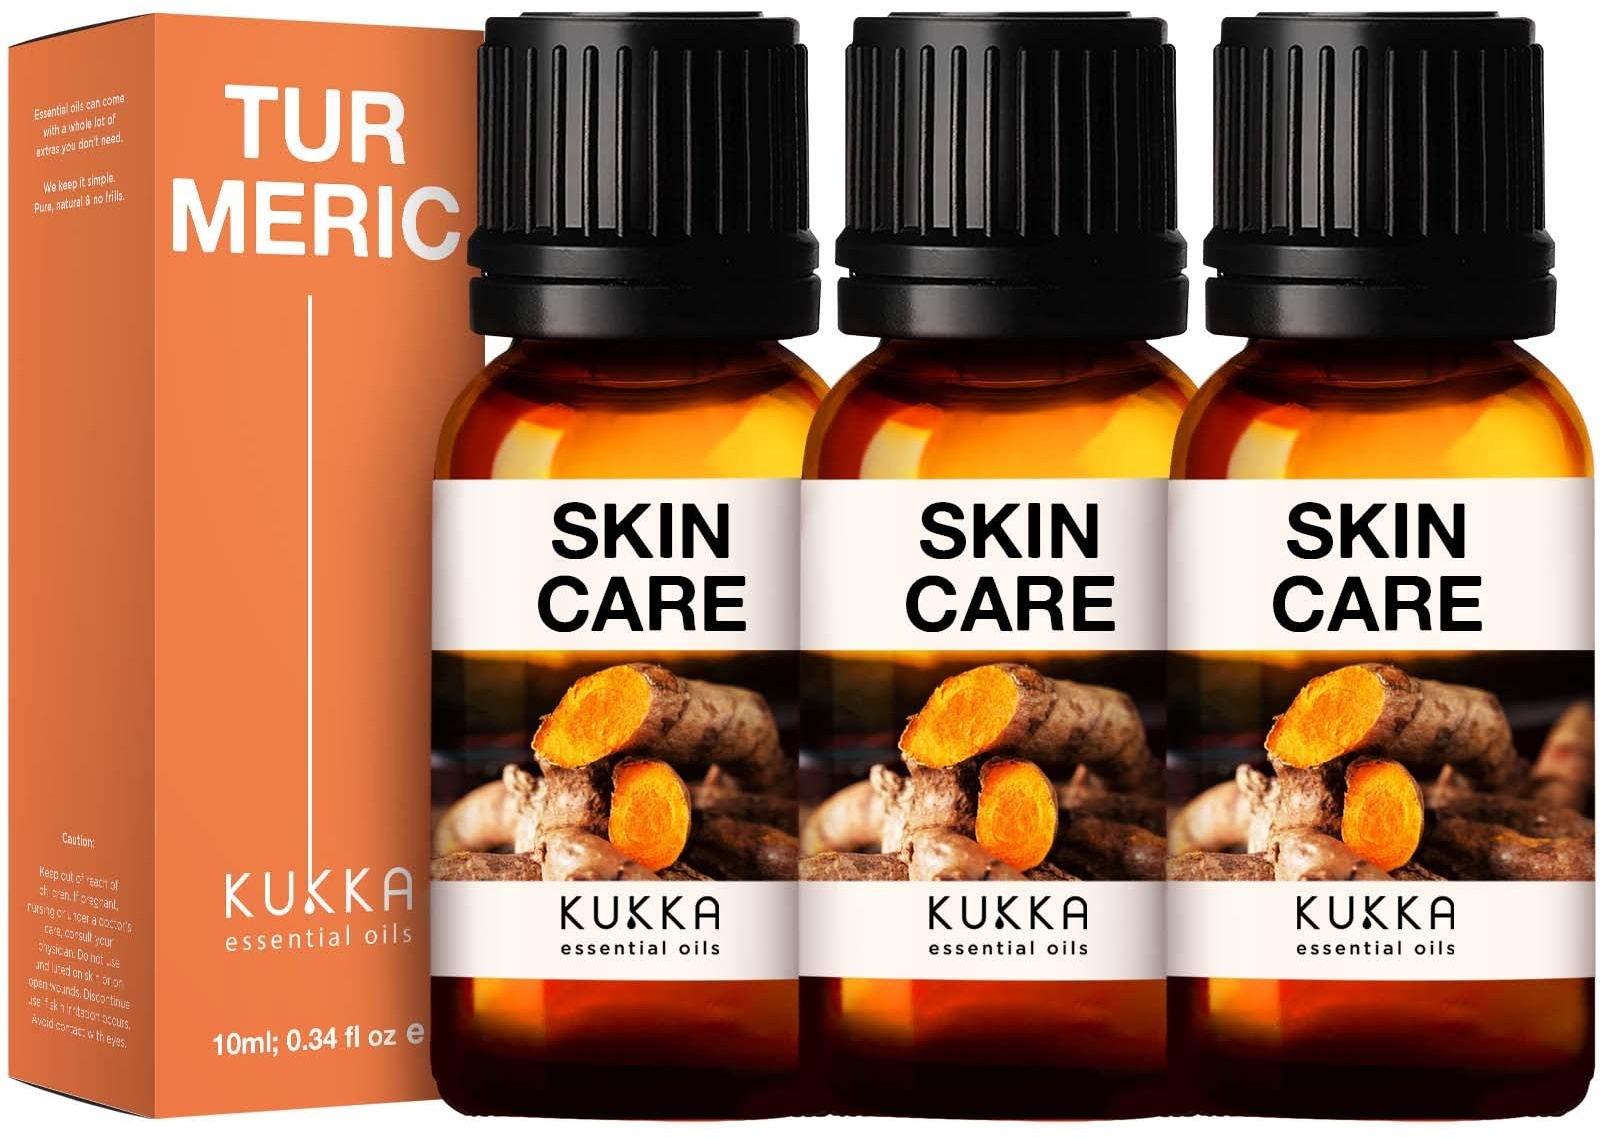 Kukka Turmeric Oil for Skin - Natural Turmeric Essential Oil for Diffuser - Turmeric Oil for Face, Hair, Aromatherapy, Bath Bombs, Soaps and Candles - Turmeric Oil for Pain (10ml x 3)